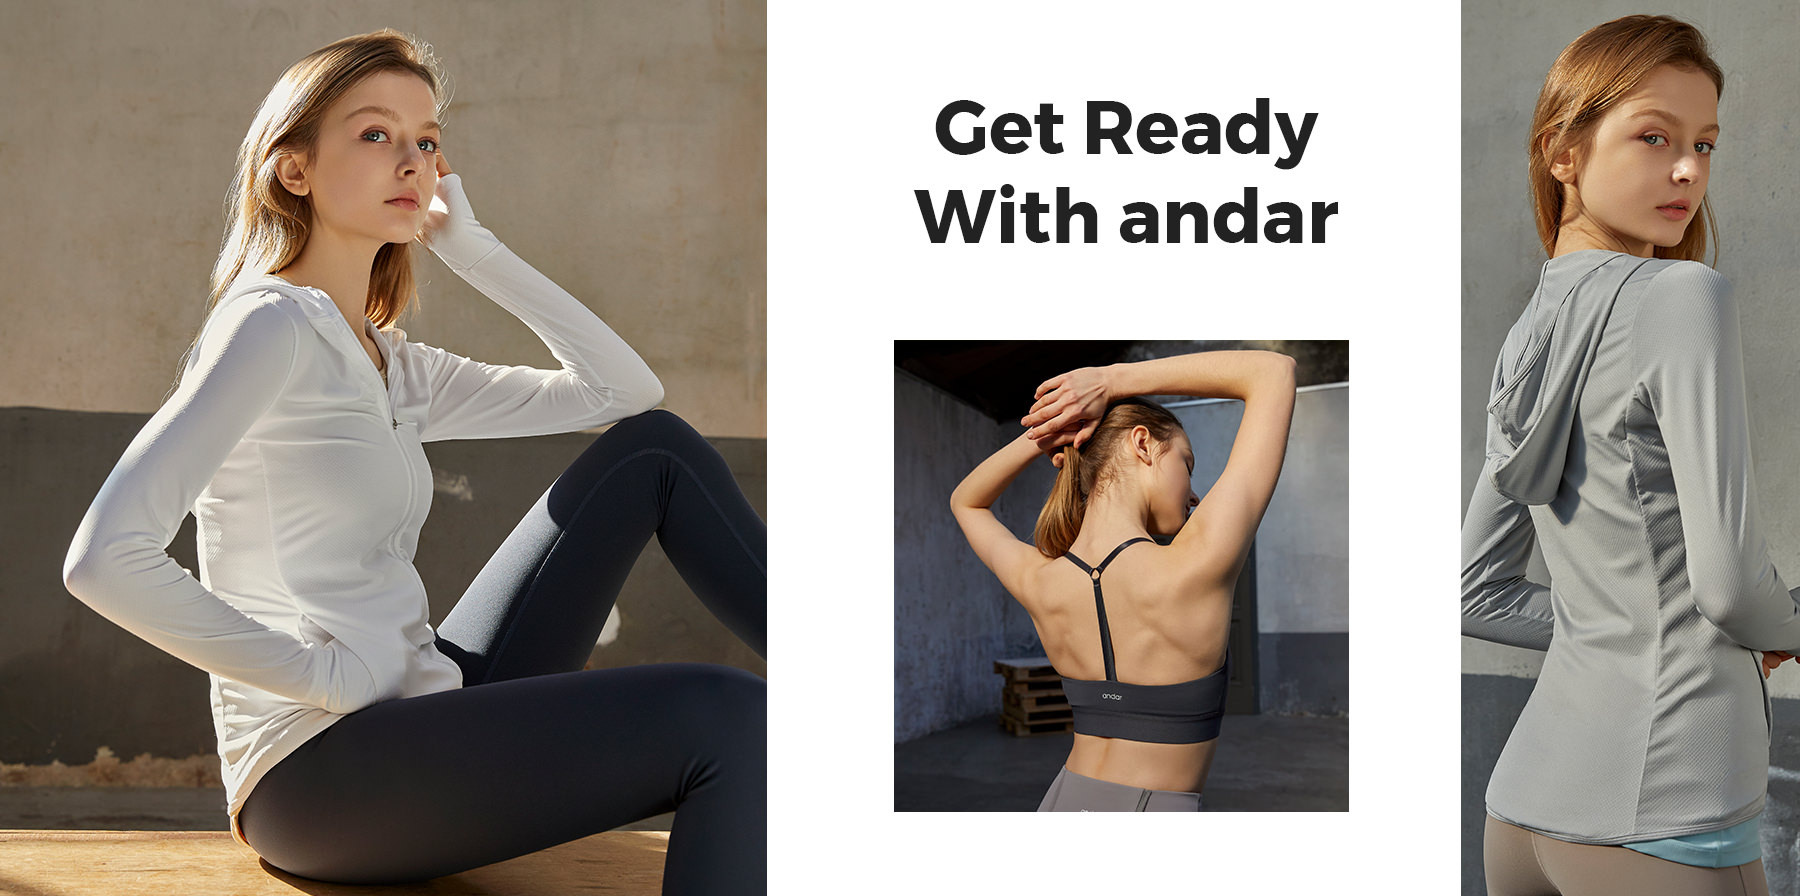 GET READY WITH andar